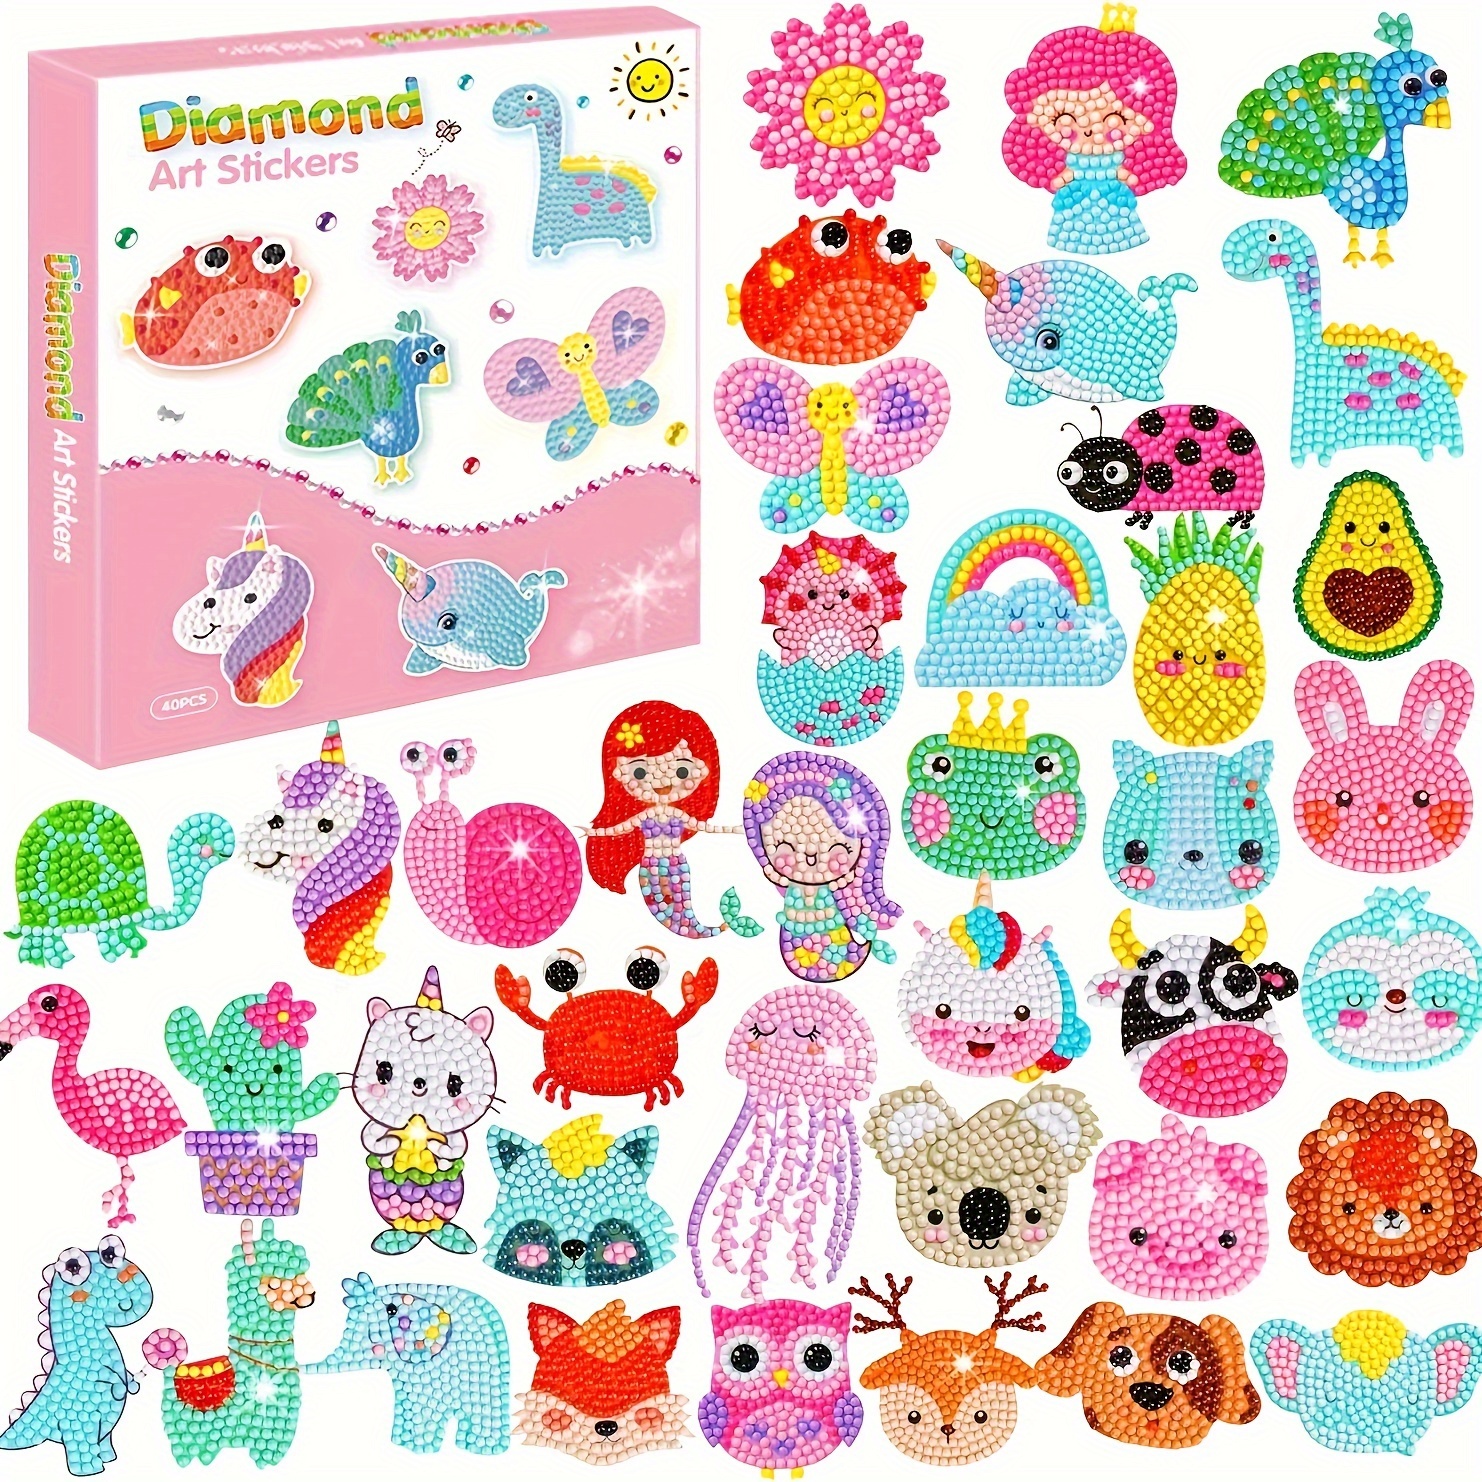 30 Pcs Plastic Stencils Art Stencils for Painting Small Stencils for  Children Creation,Scrapbooking, Including People, Animals and Plants  Pattern(5.12 X 5.12 Inches)